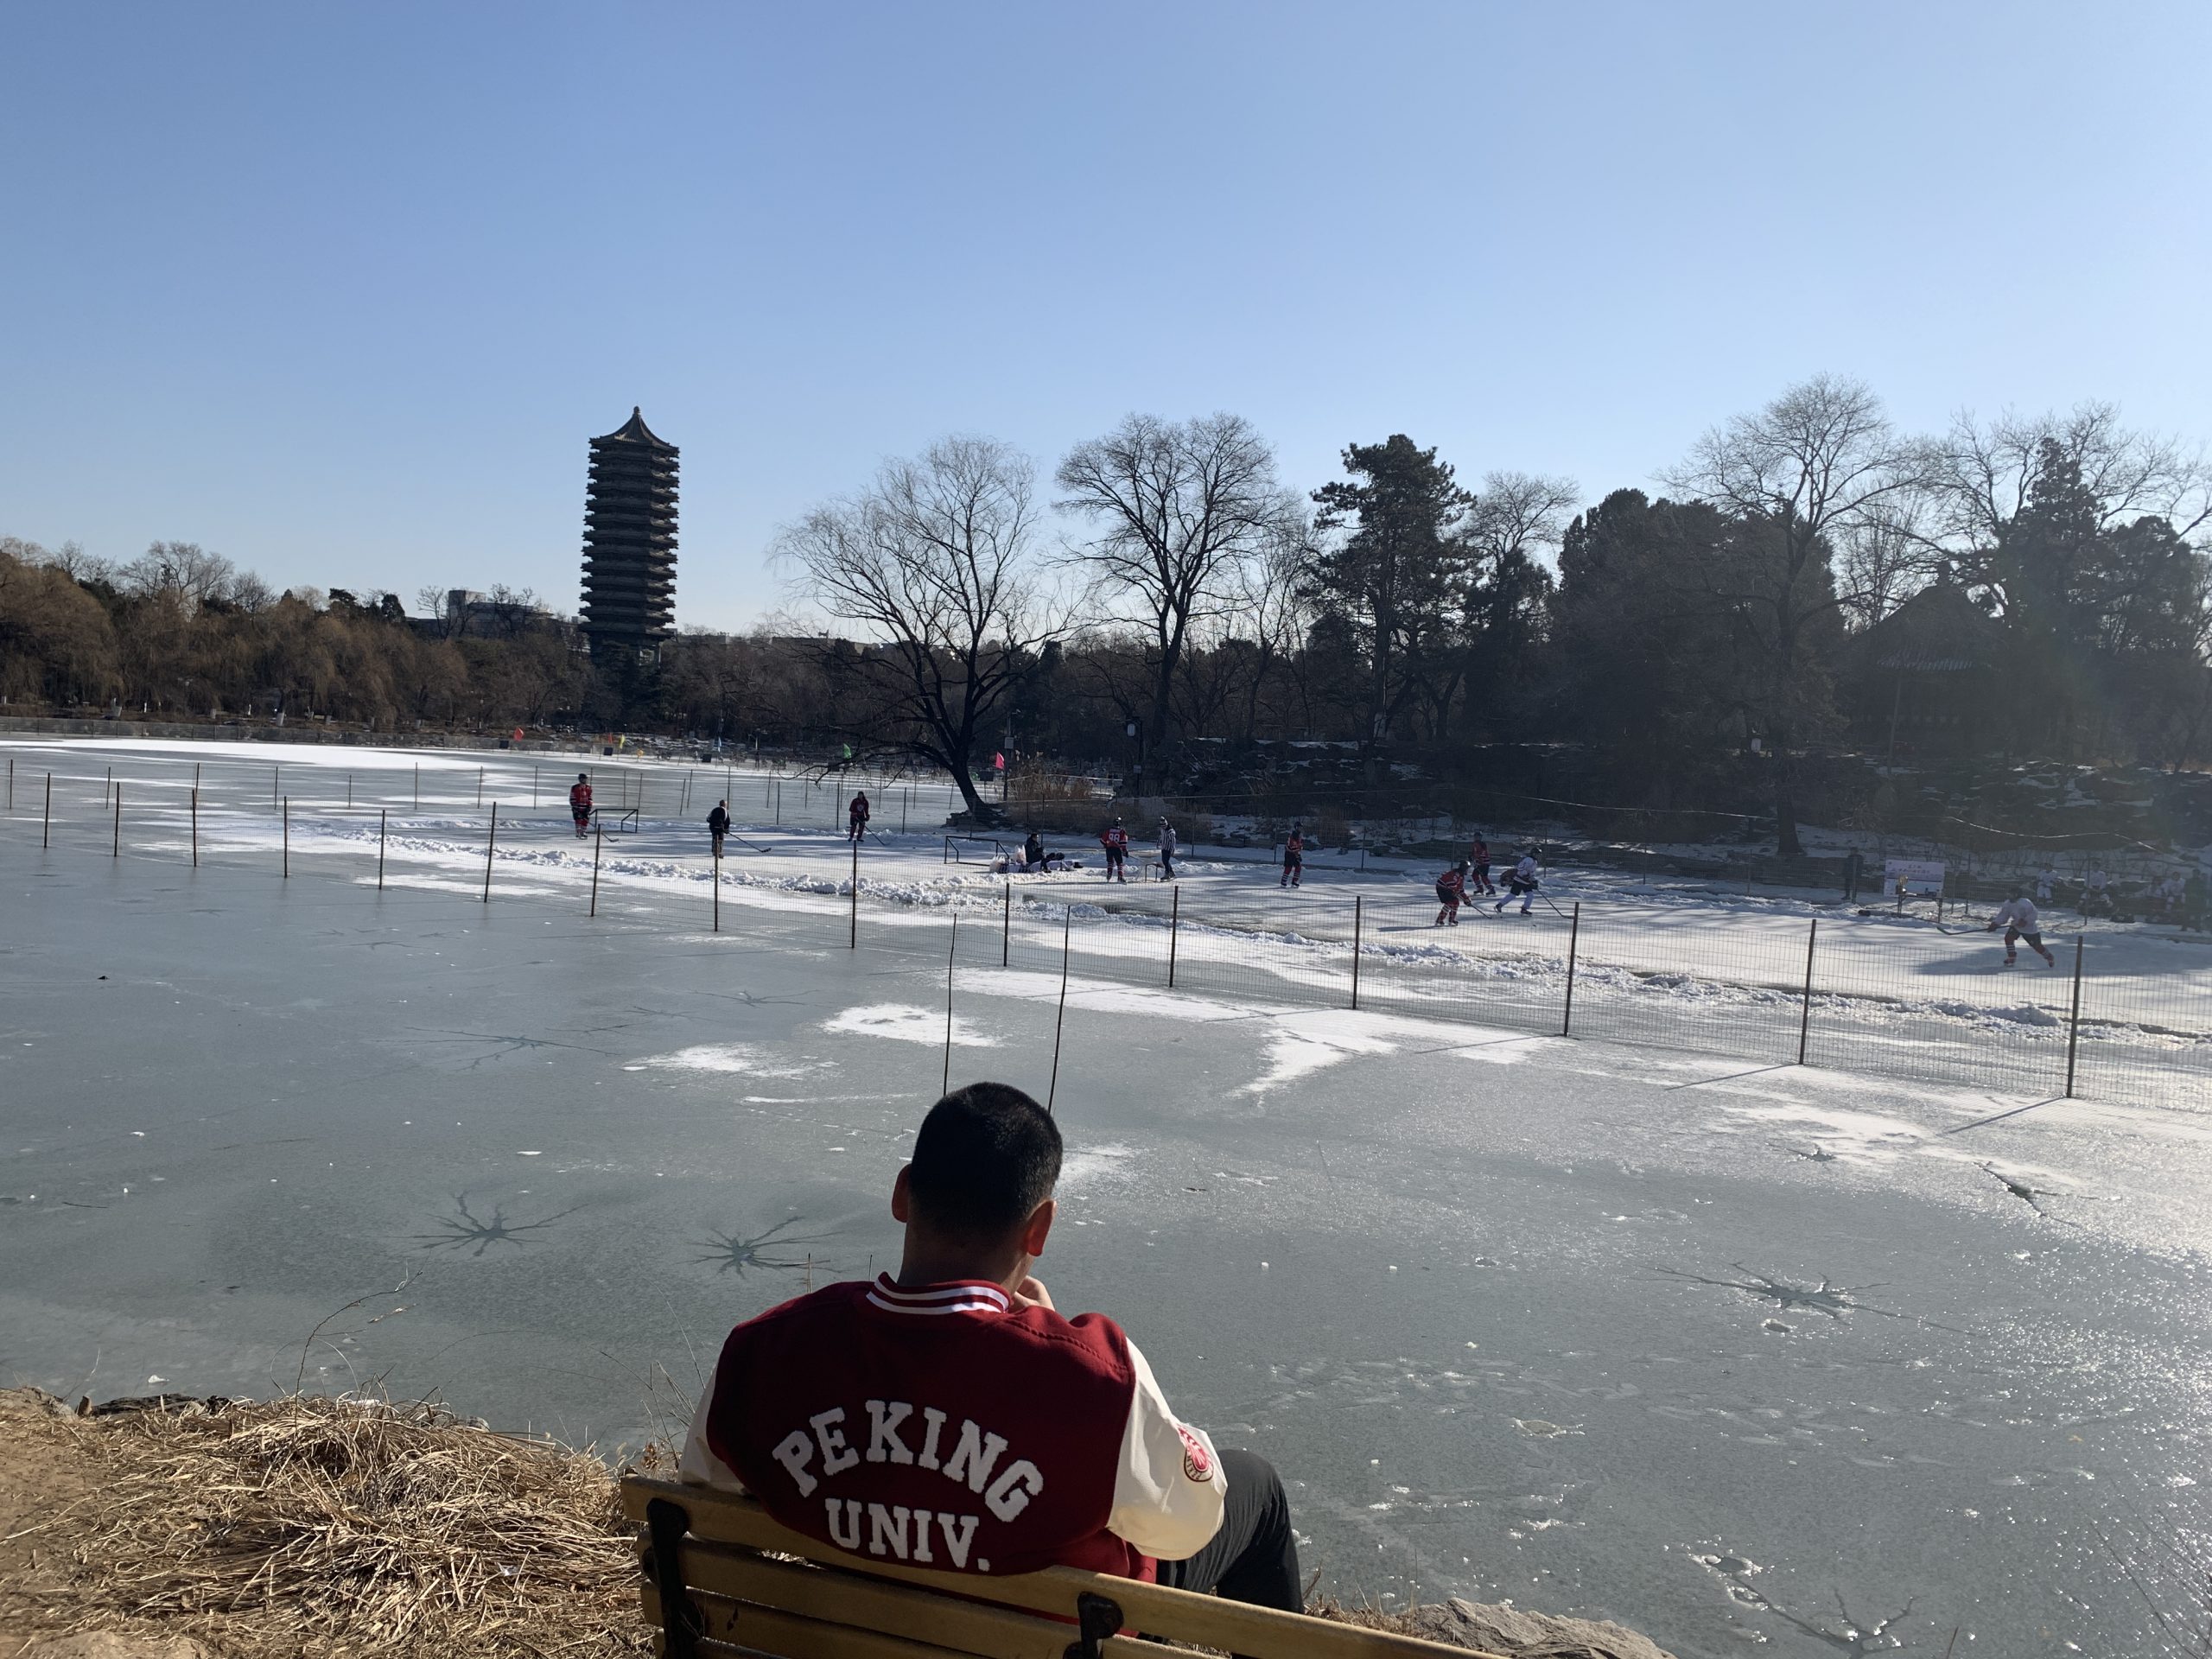 Weiming Lake in winter, frozen over with hockey players in the middle of a match